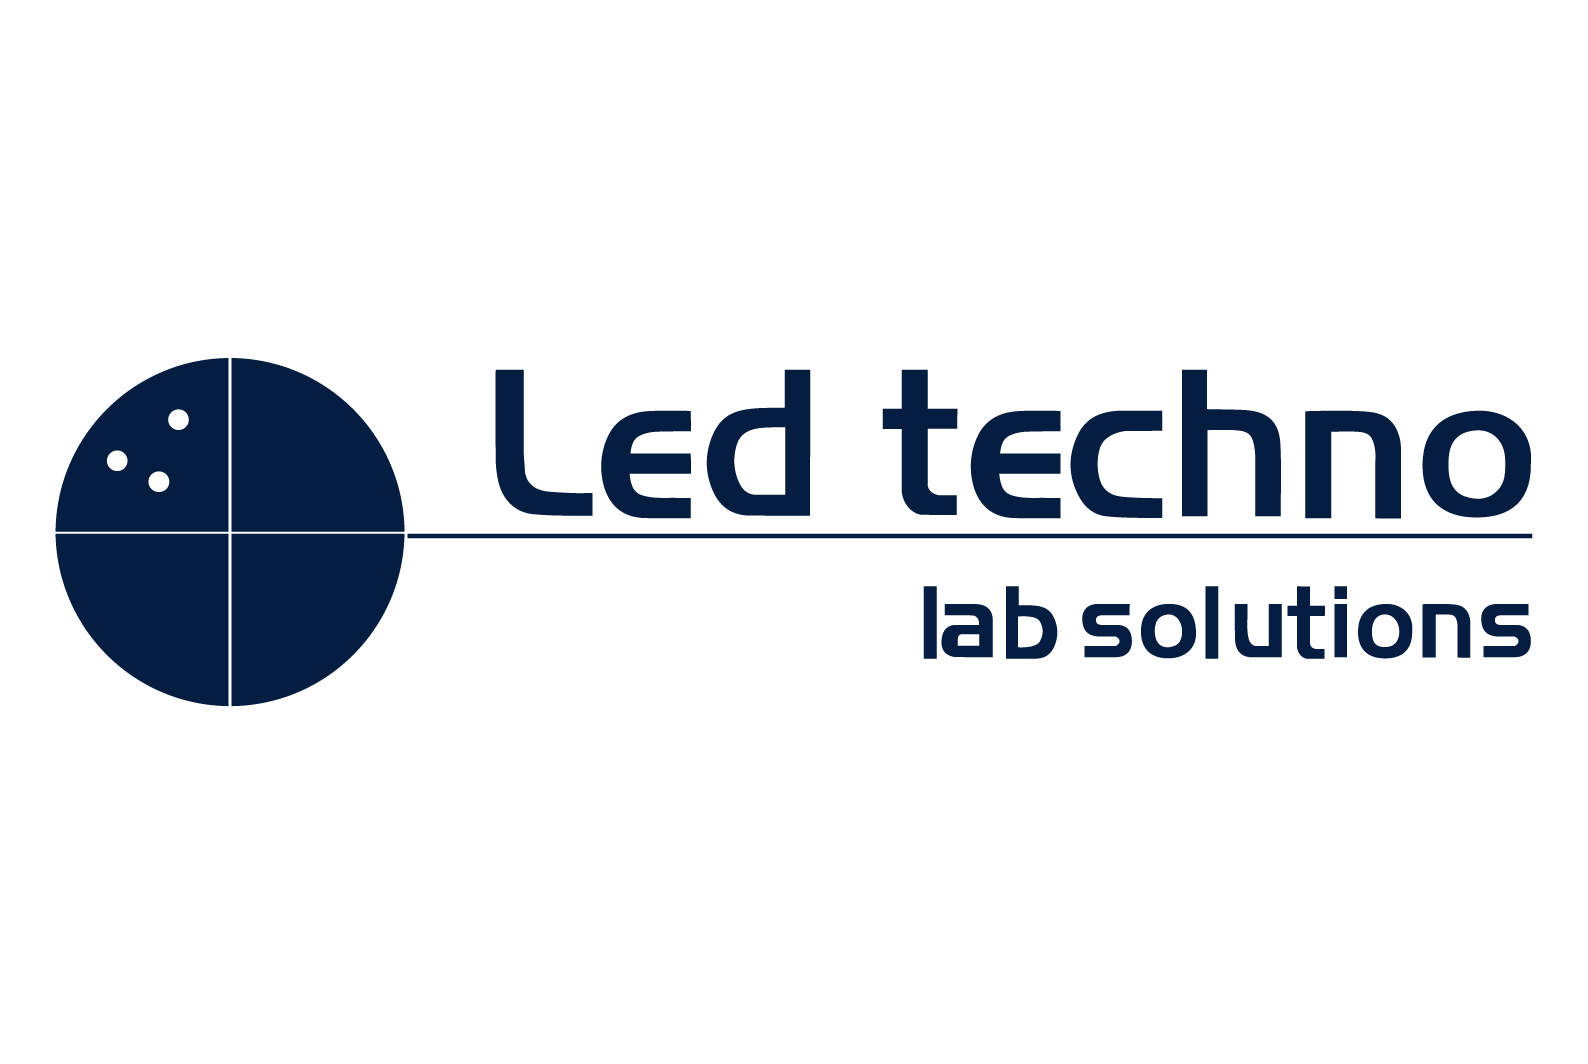 IEH Announces Acquisition of Led techno - IEH Laboratories Consulting Group - The Institute for Environmental Health